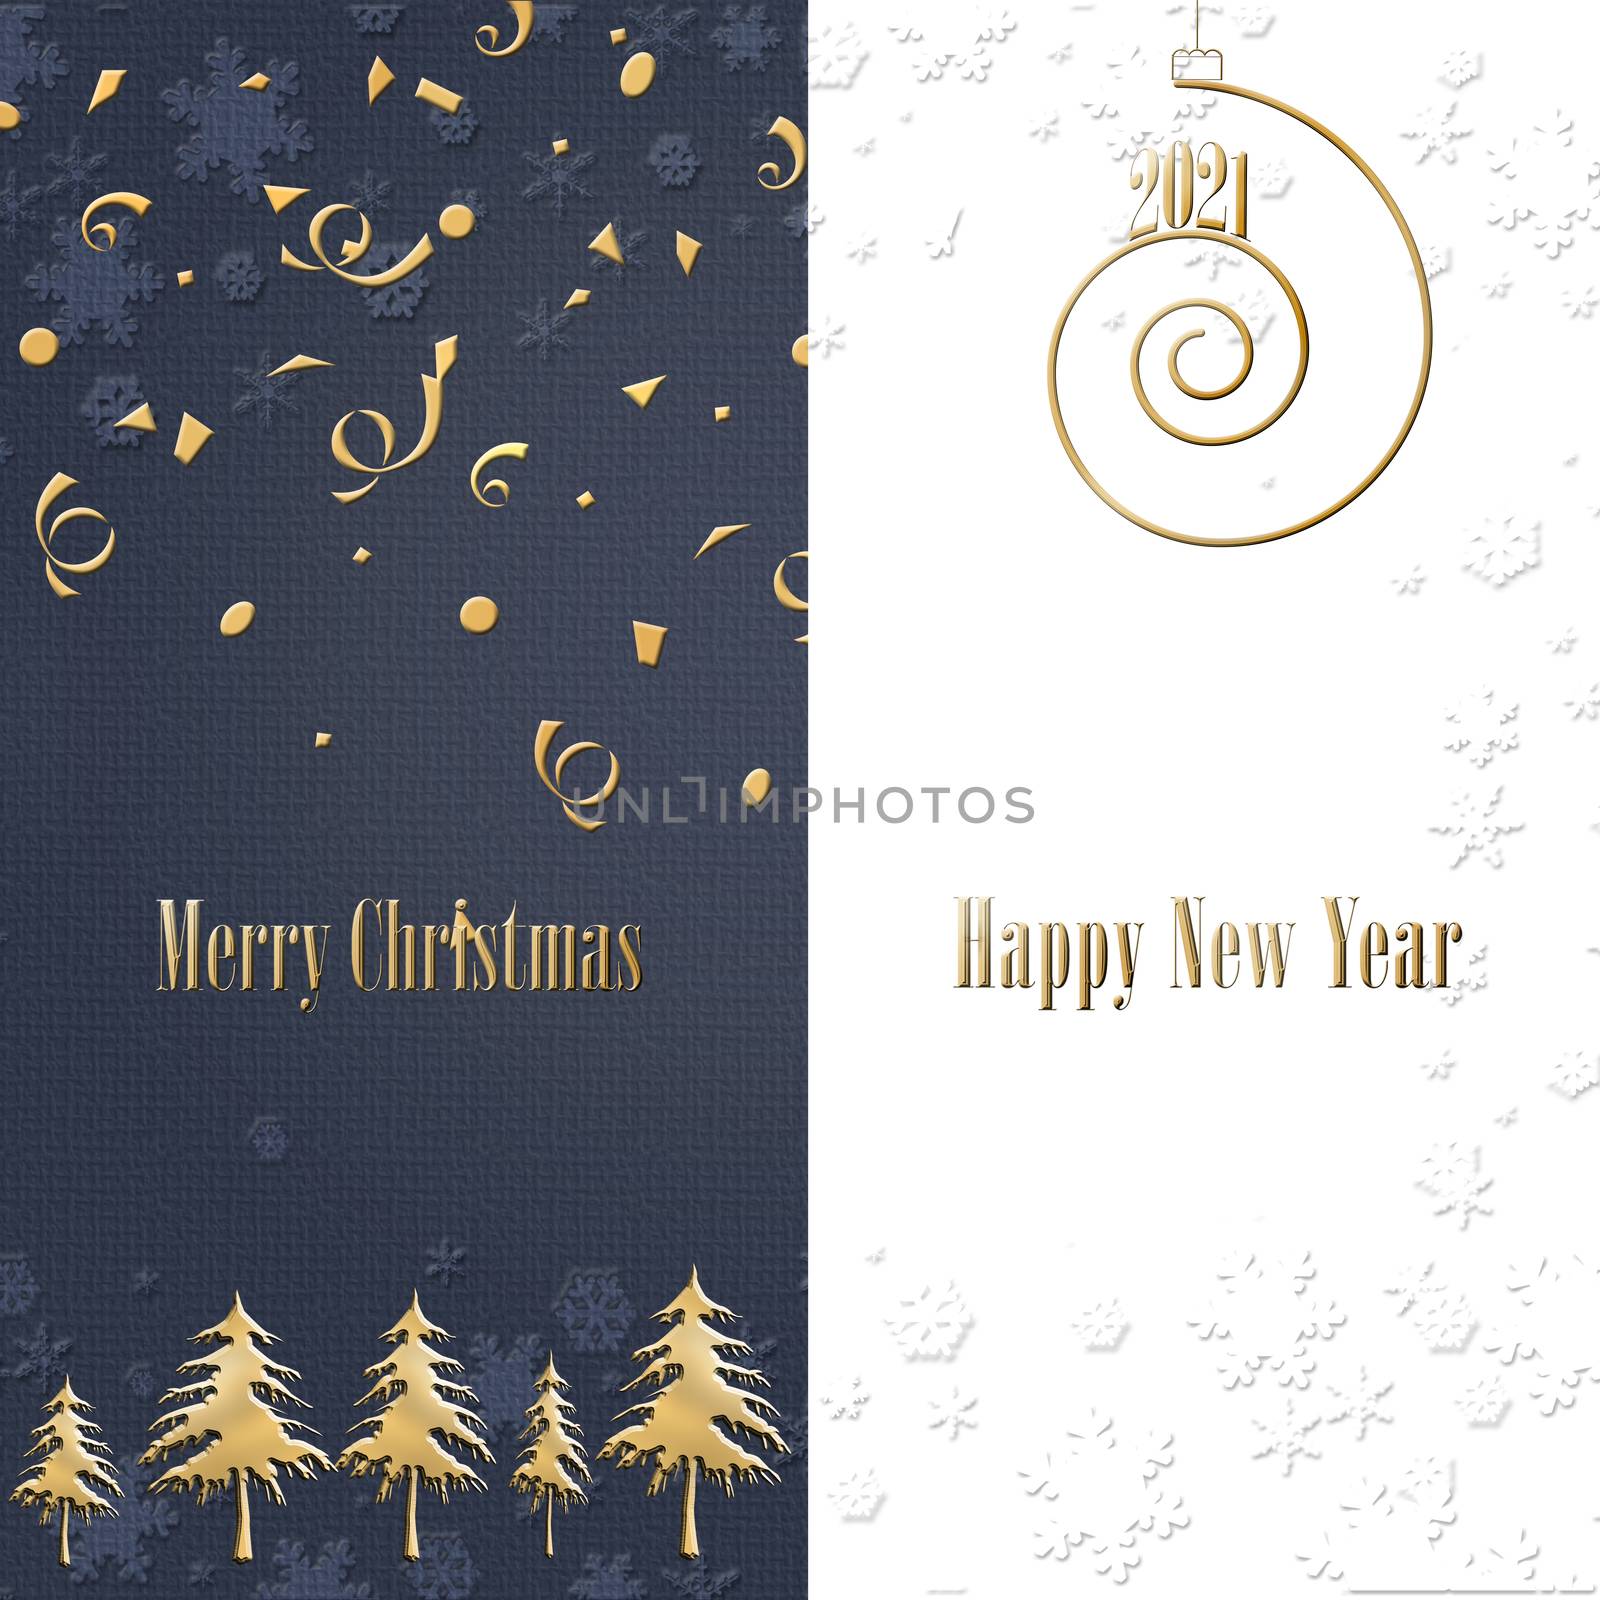 Merry Christmas card on dark blue background with text by NelliPolk